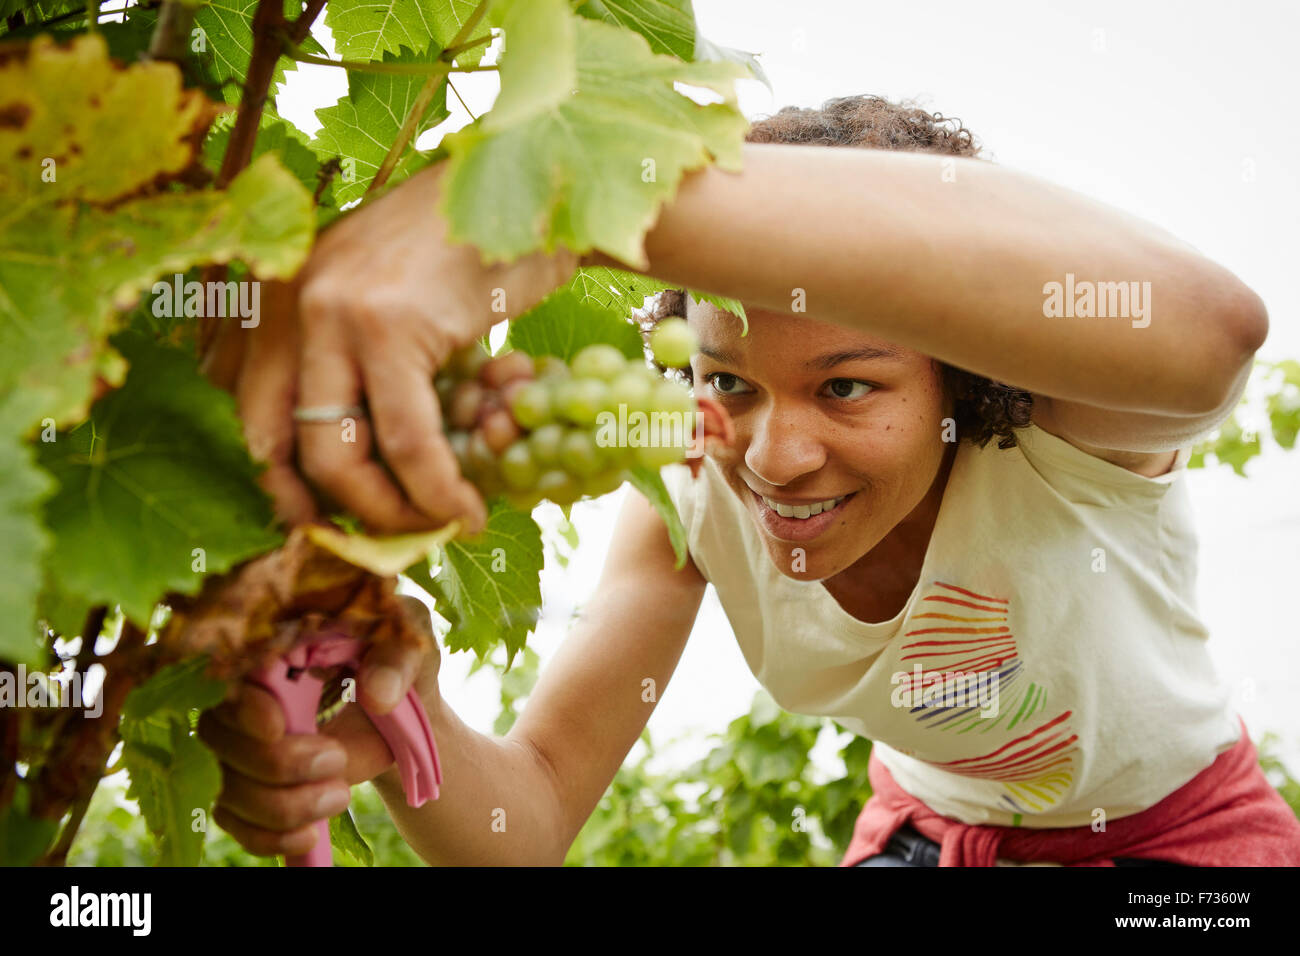 A woman picking bunches of grapes in a vineyard. Stock Photo